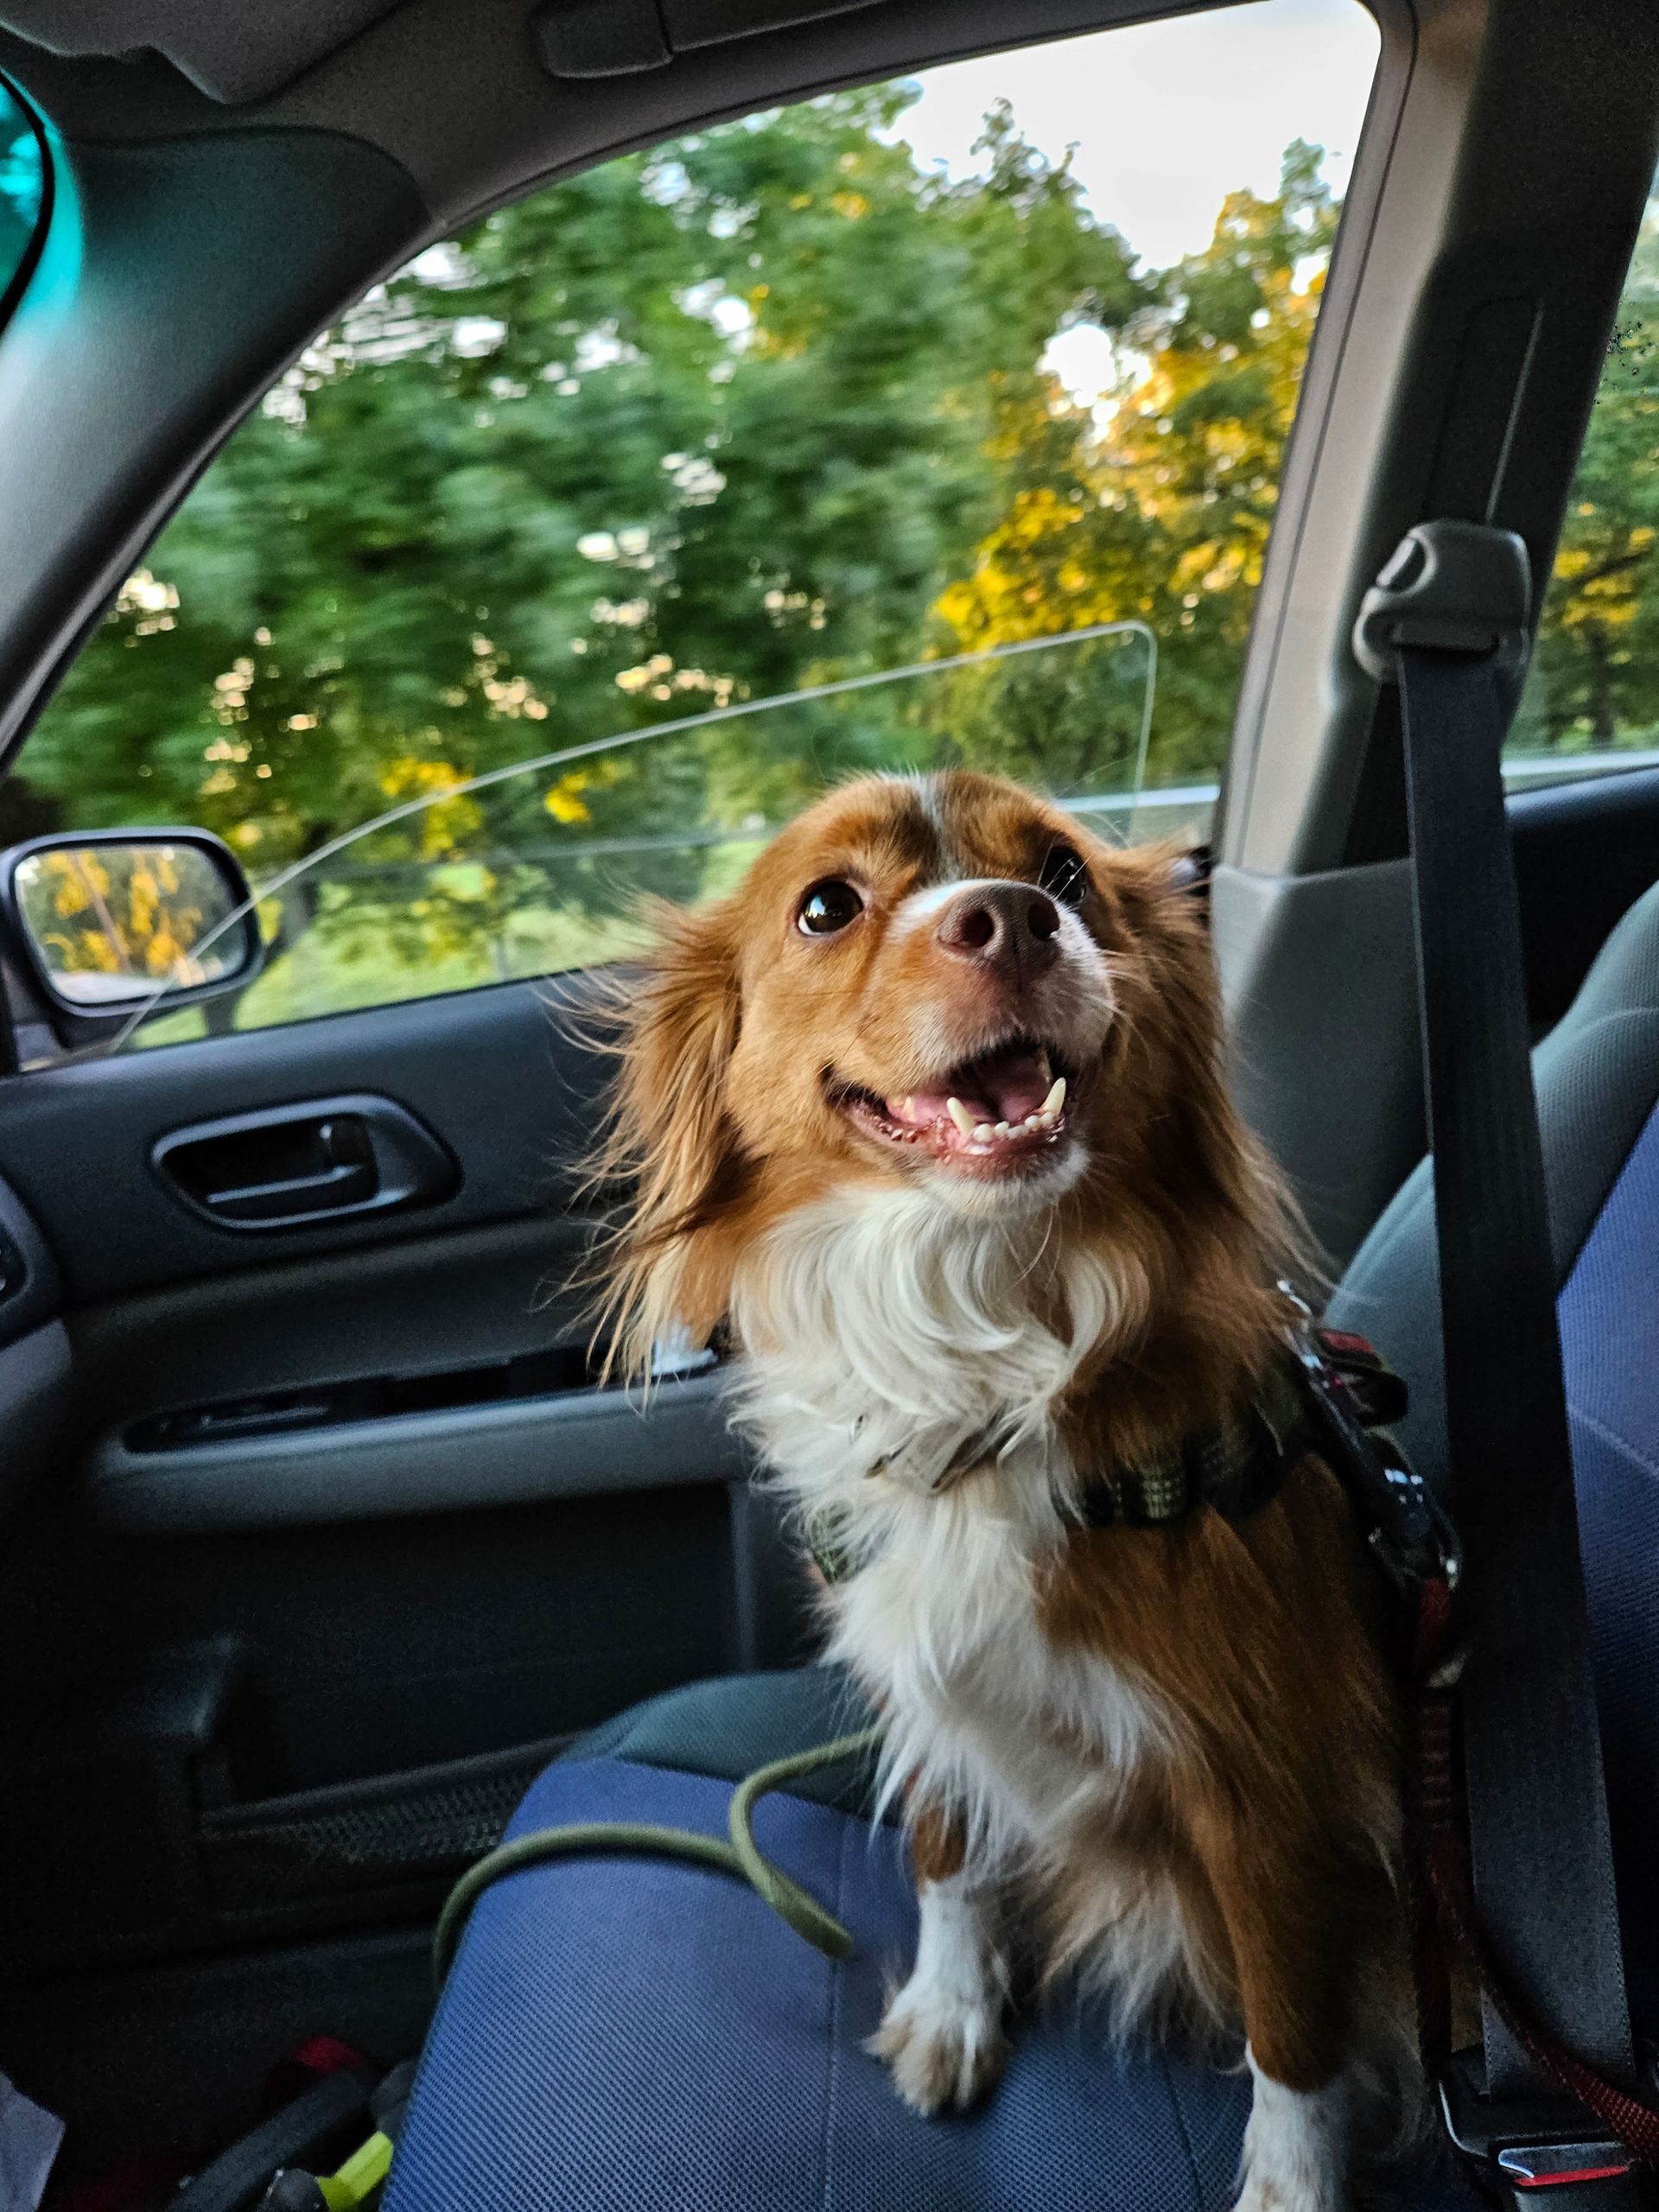 A brown and white dog is sitting in the back seat of a car.